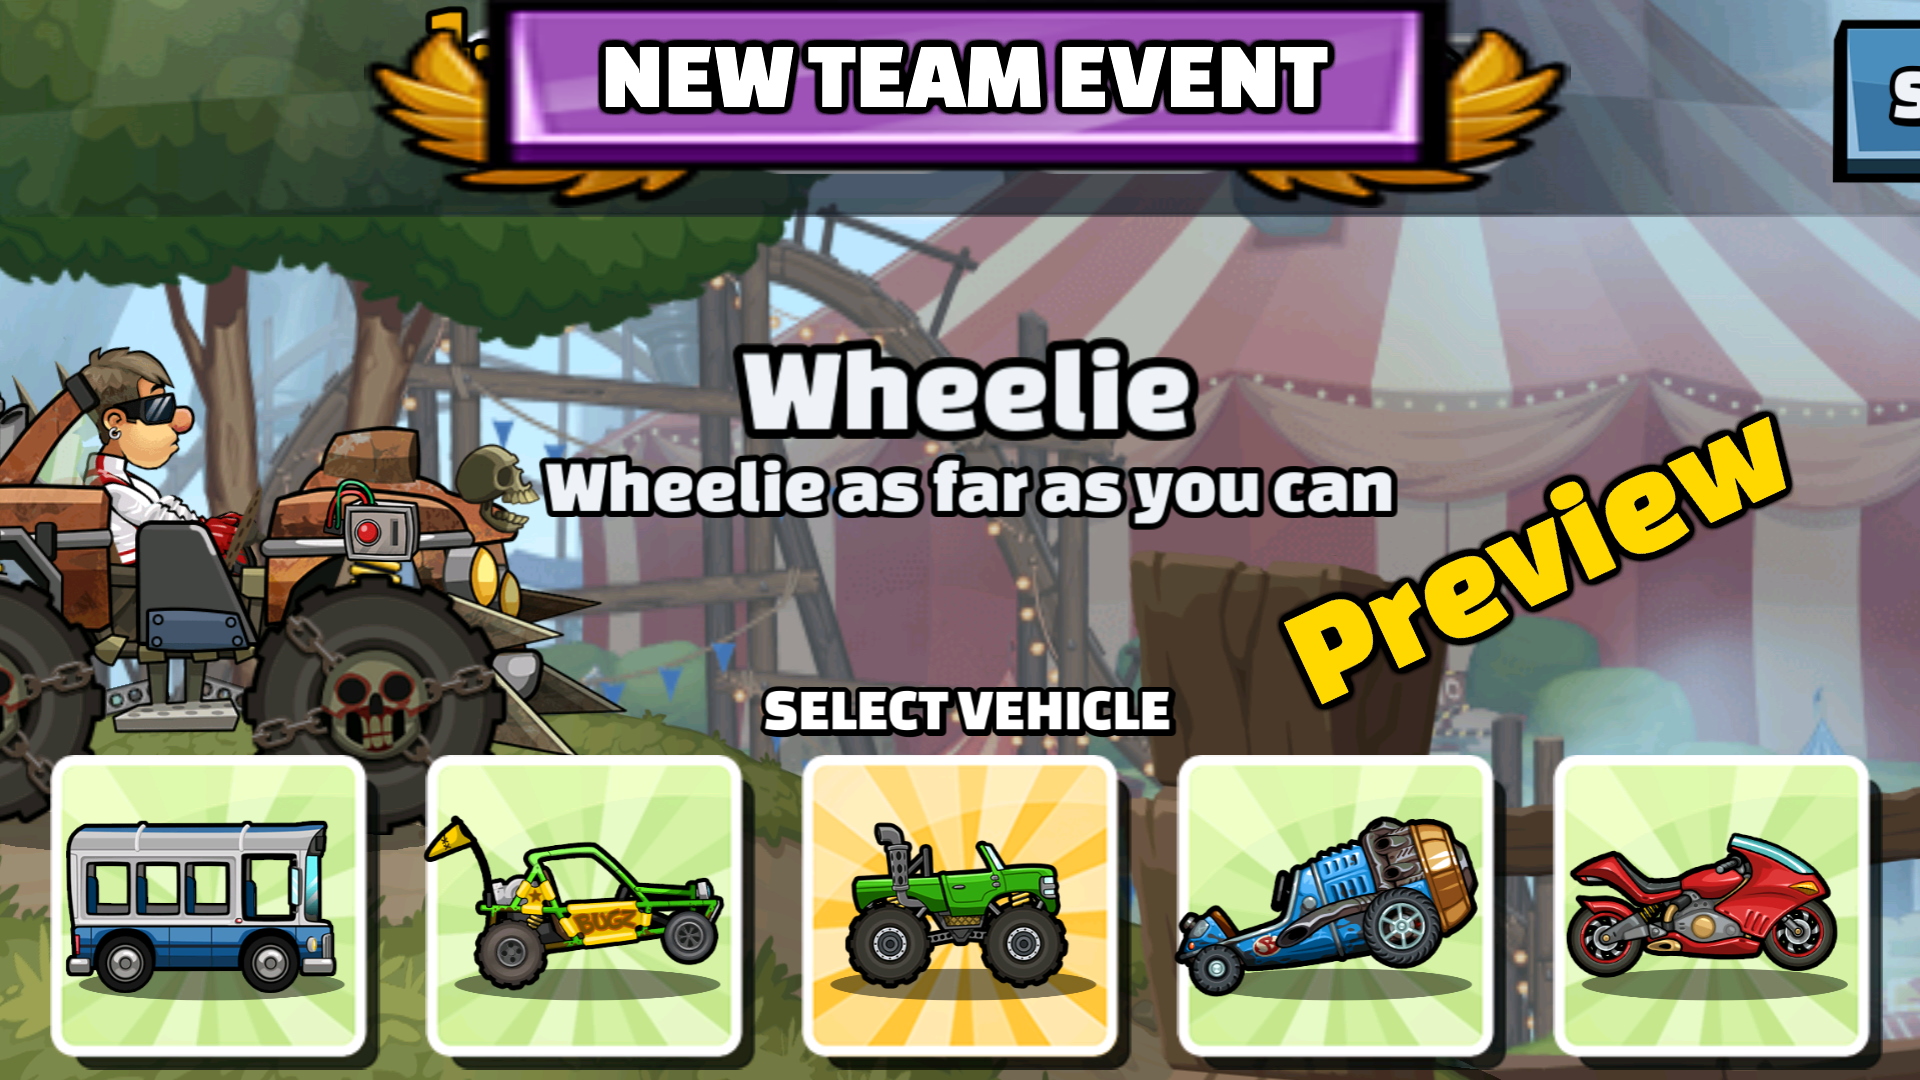 Hill Climb Racing on X: Welcome to the first-ever Hill Climb Racing 2  Soapbox Derby! Roll downhill in your box cart and hold on tight in this  week's public event - Collapse